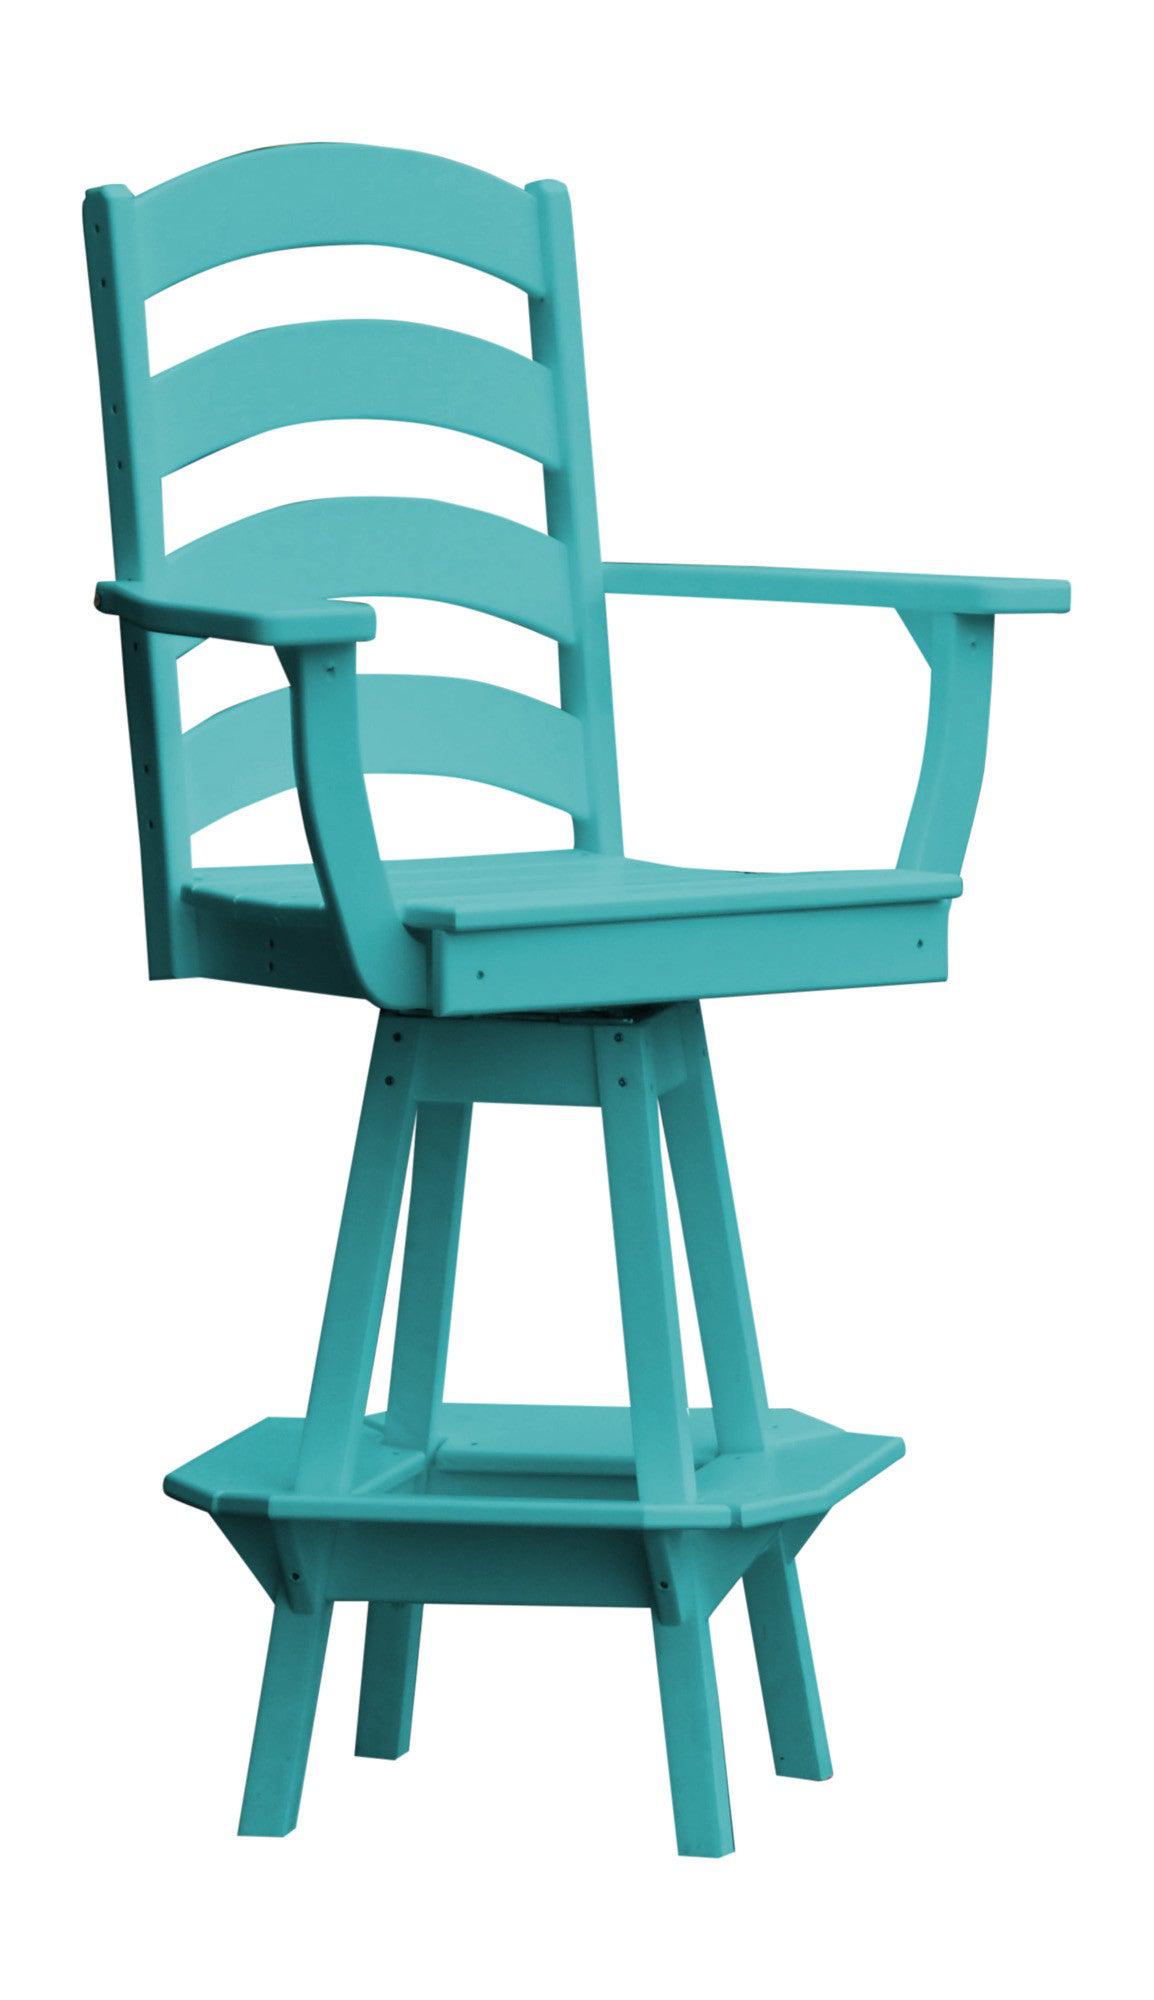 A&L Furniture Recycled Plastic Ladderback Swivel Bar Chair with Arms - Aruba Blue